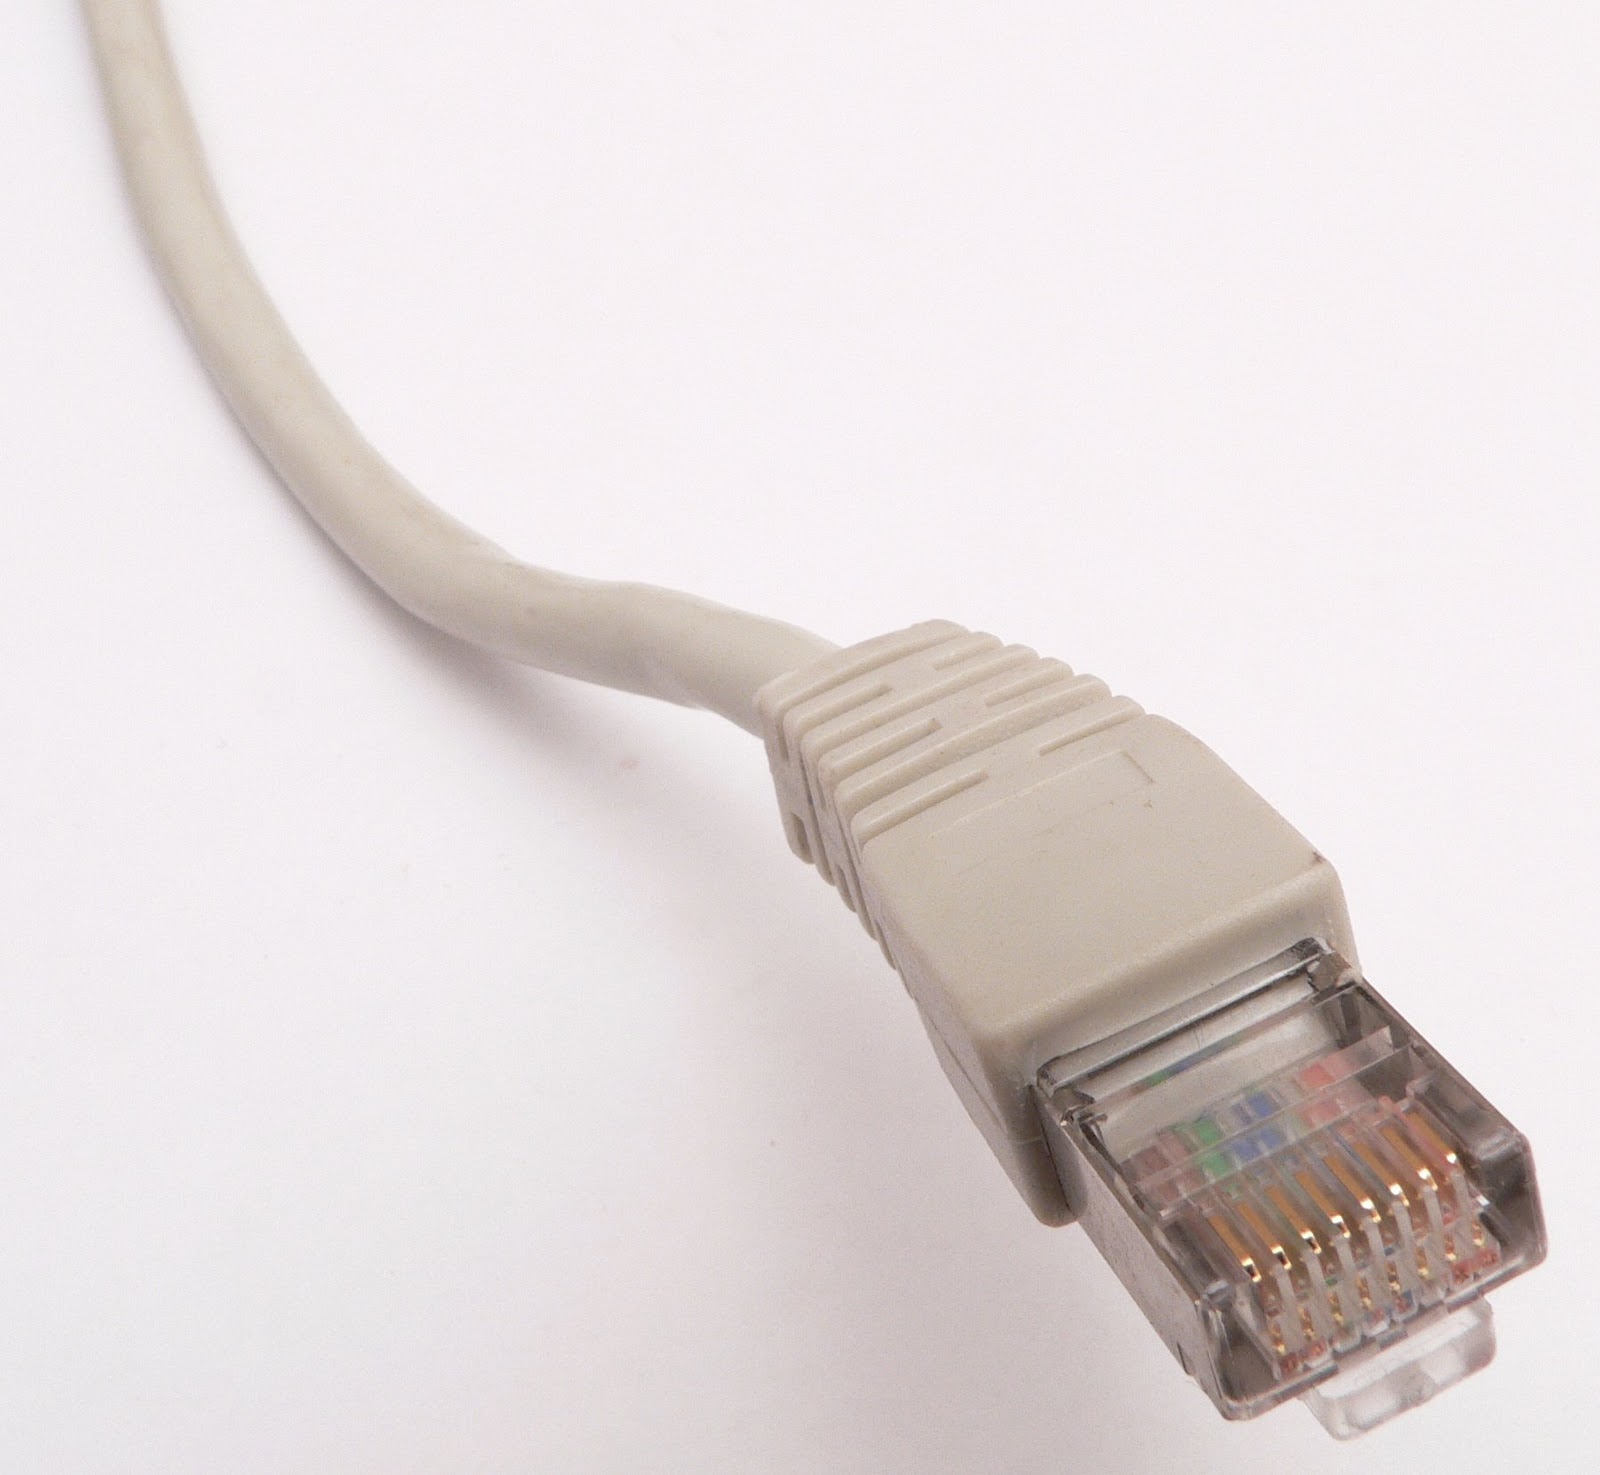 Internet Support: About RJ 45 Connection Standards